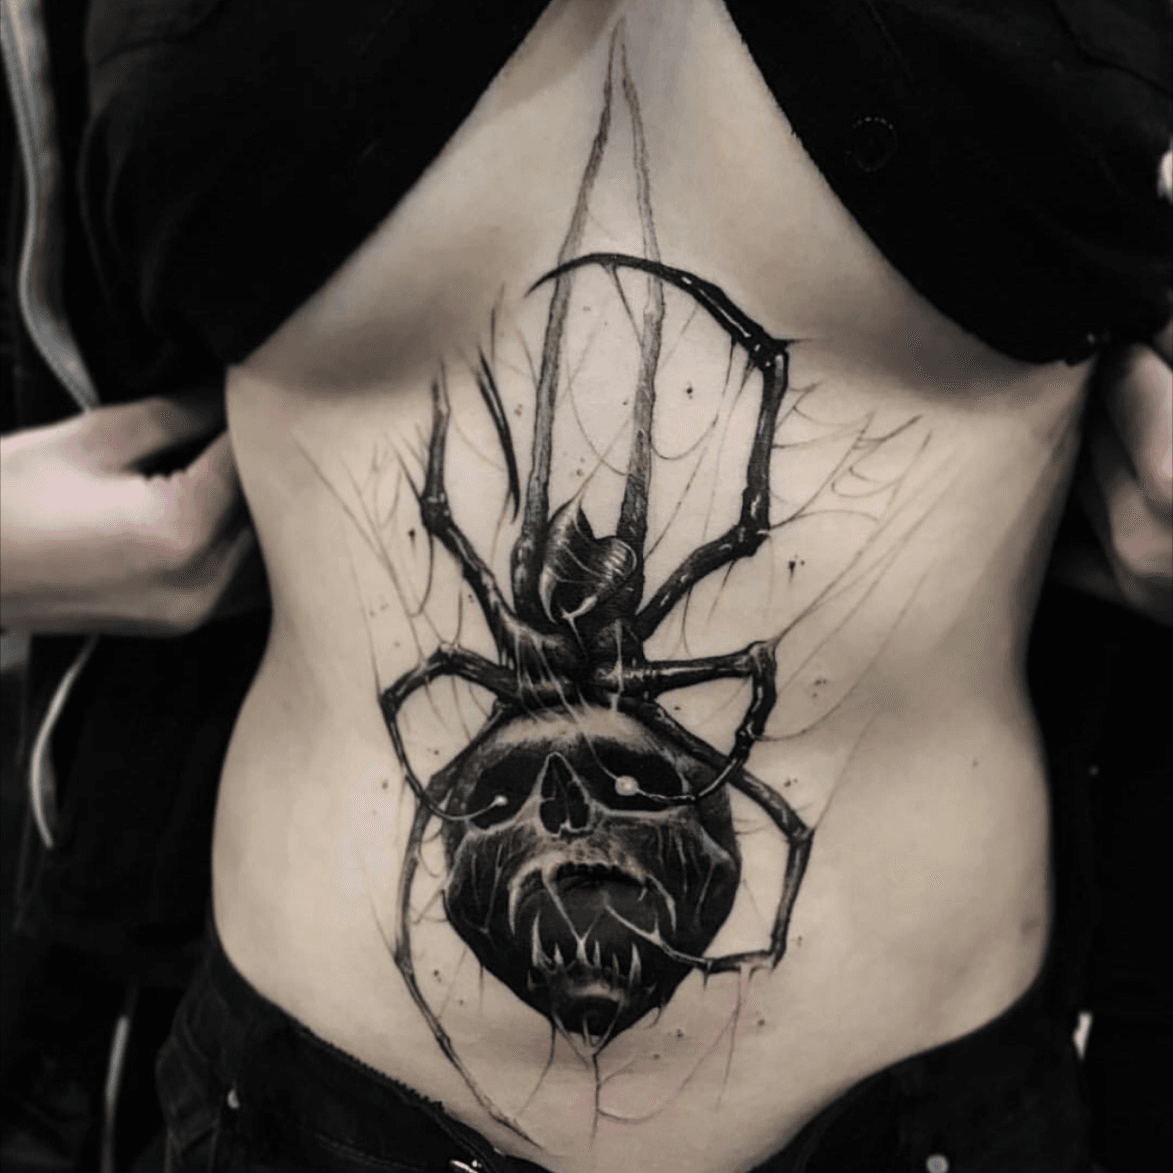 Coraline inspired sternum spider up for grabs Give me a message to book  in spider spidertattoo sternum st  Web tattoo Spider web tattoo  Dragon tattoo art